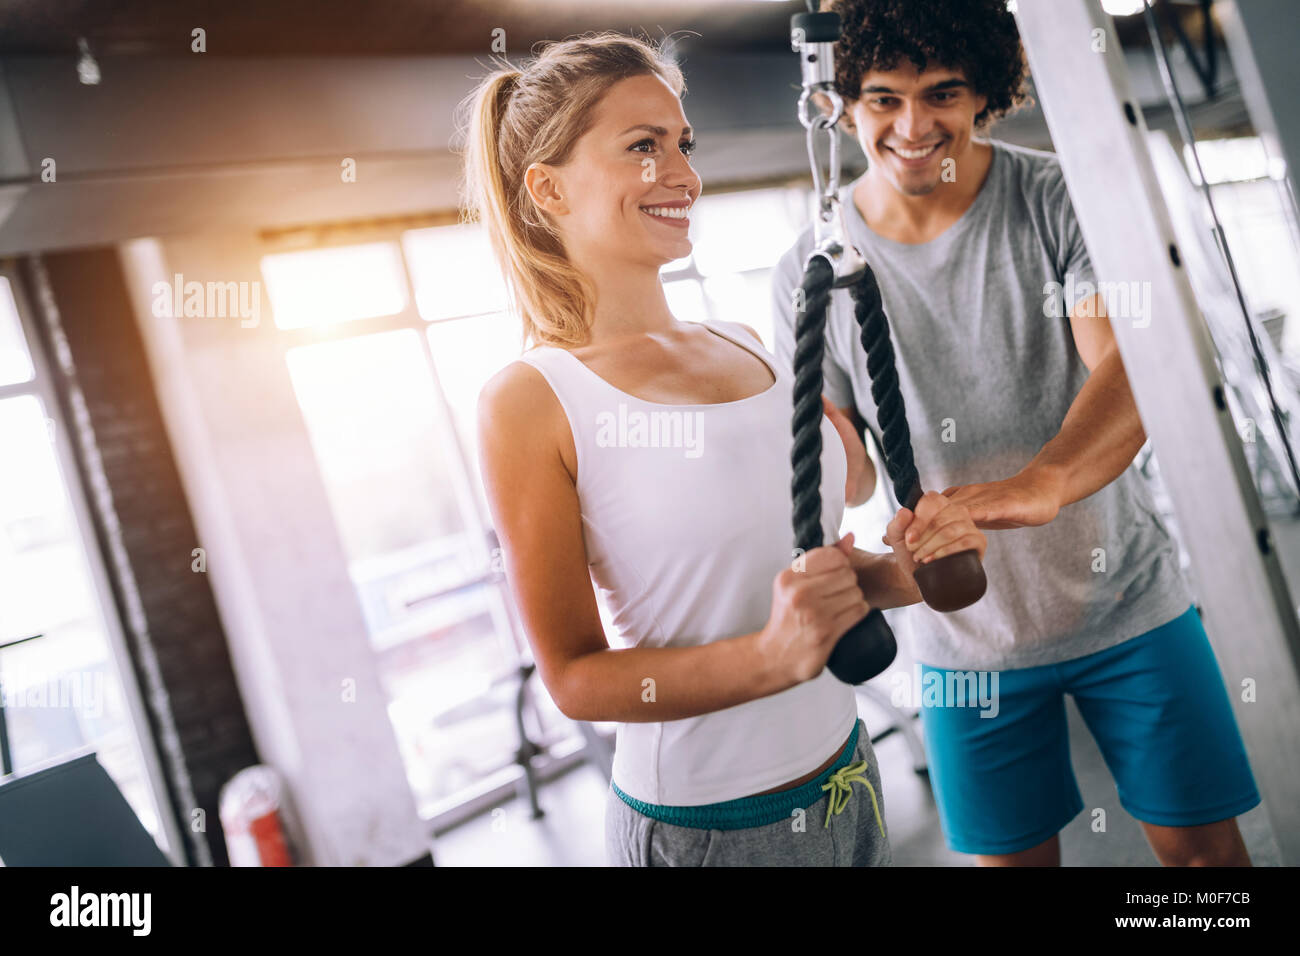 Young beautiful woman doing exercises with personal trainer Stock Photo